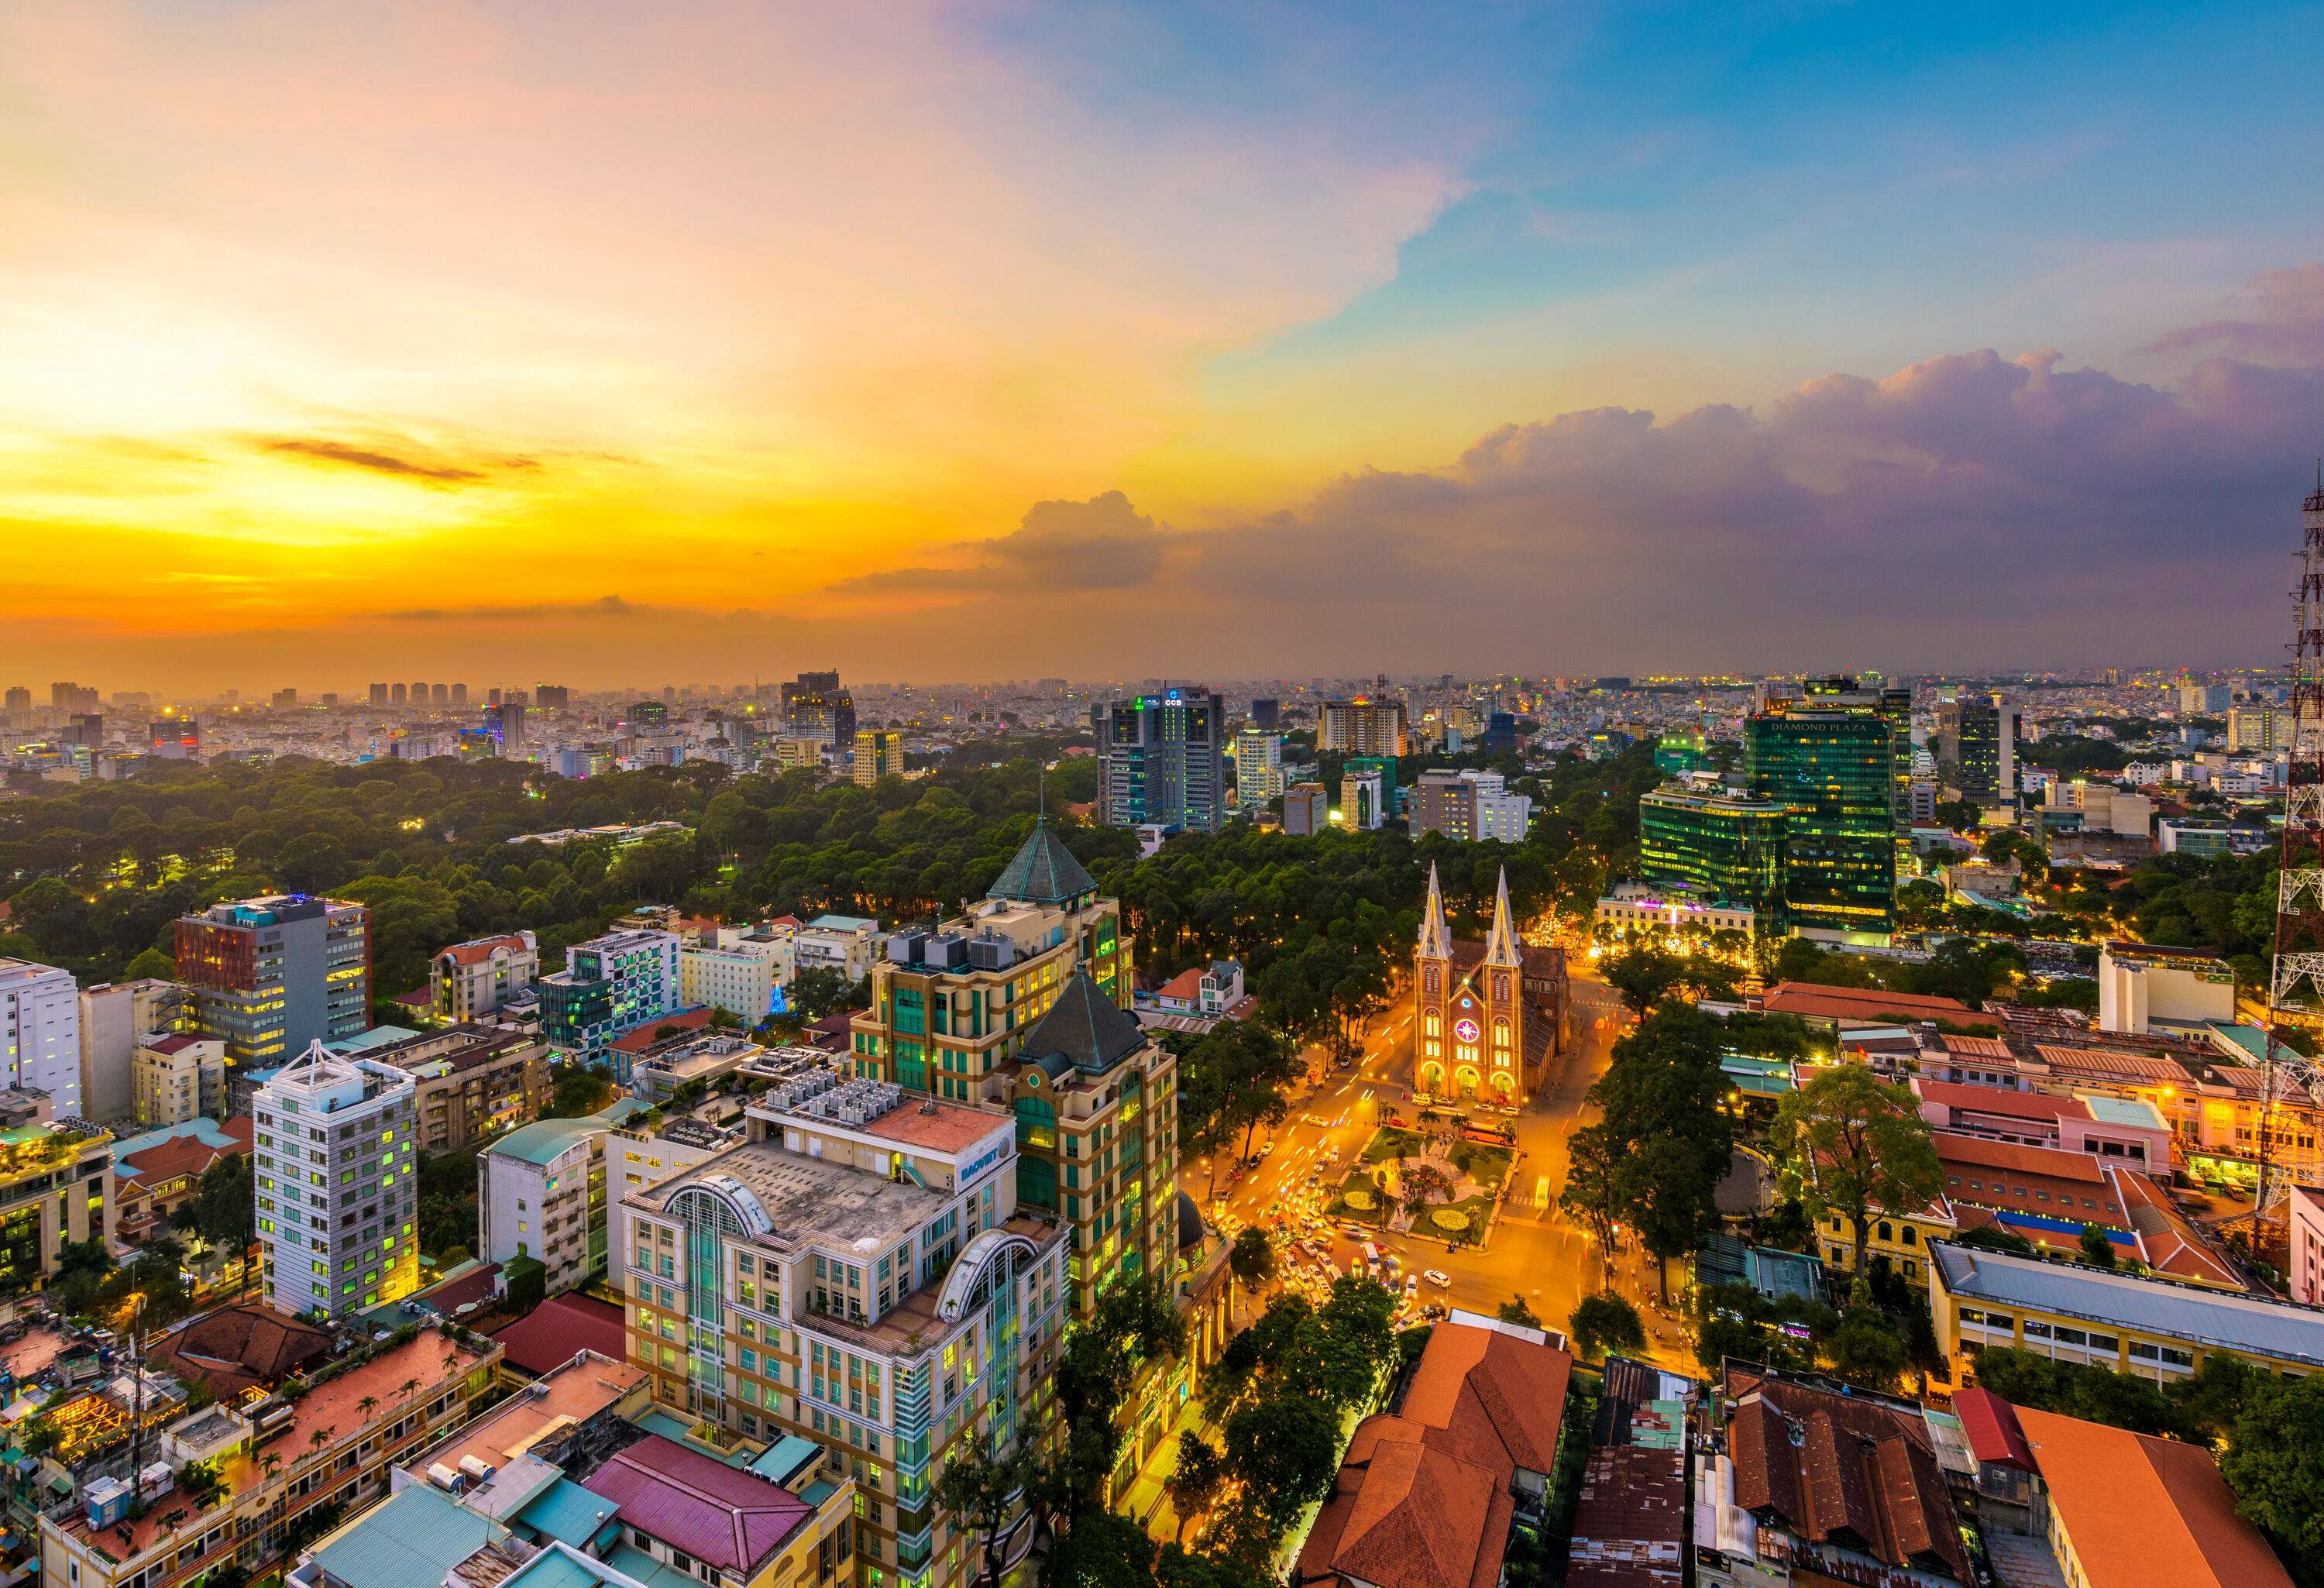 Urban landscape of a dazzling city under the sunset skies.